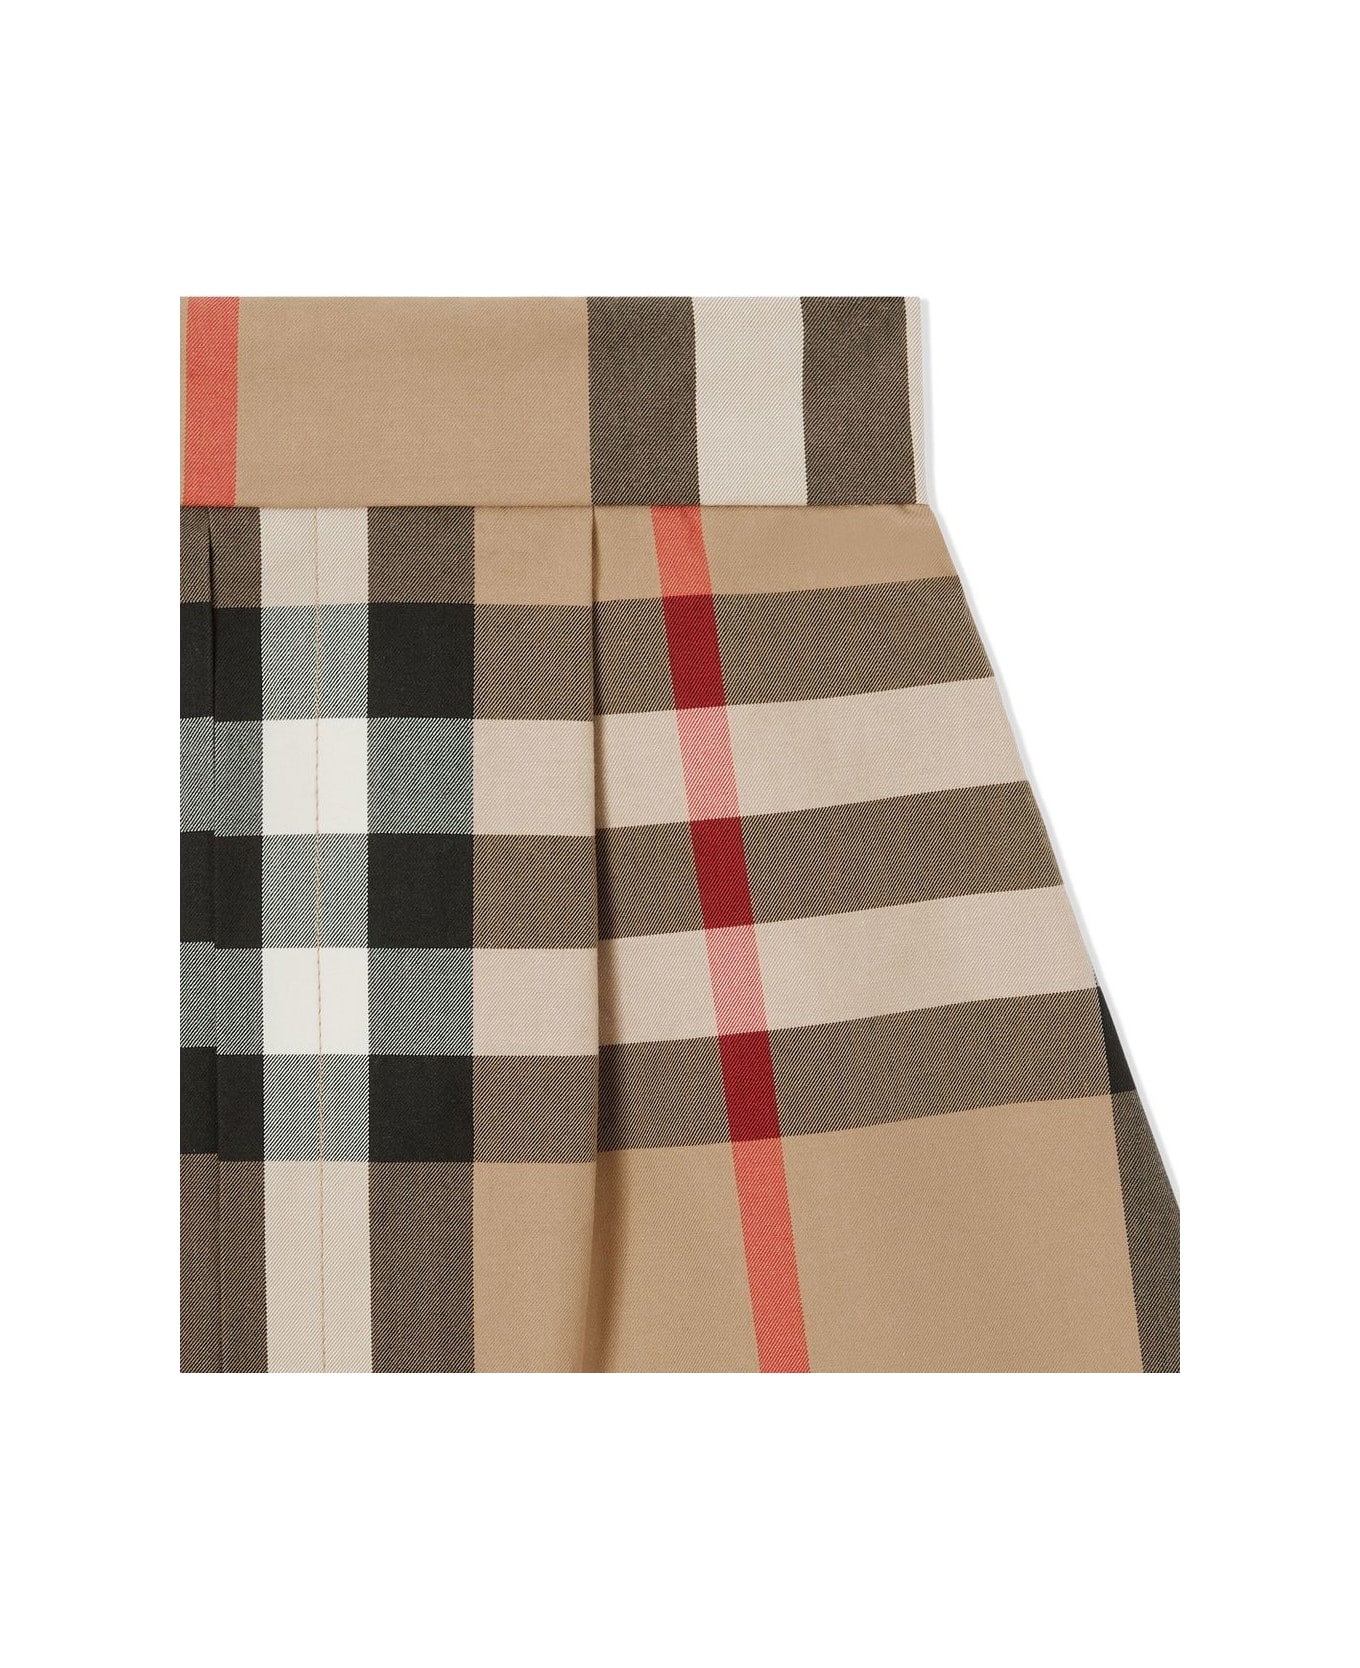 Burberry Anjelica Checked Skirt - Archive Beige Ip Chk ボトムス